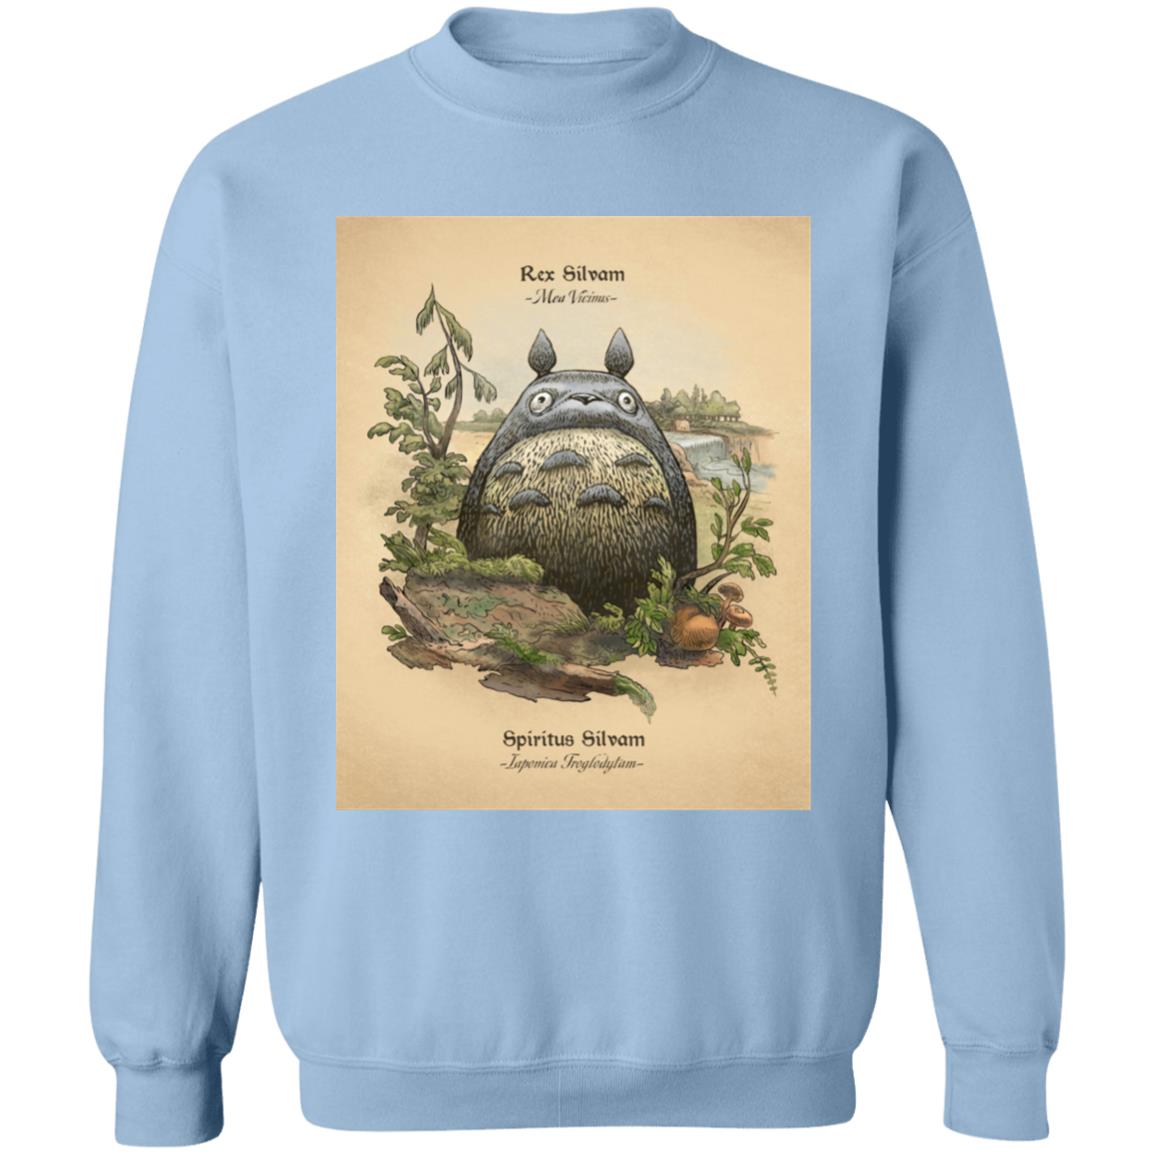 Totoro in the Forest Classic Sweatshirt